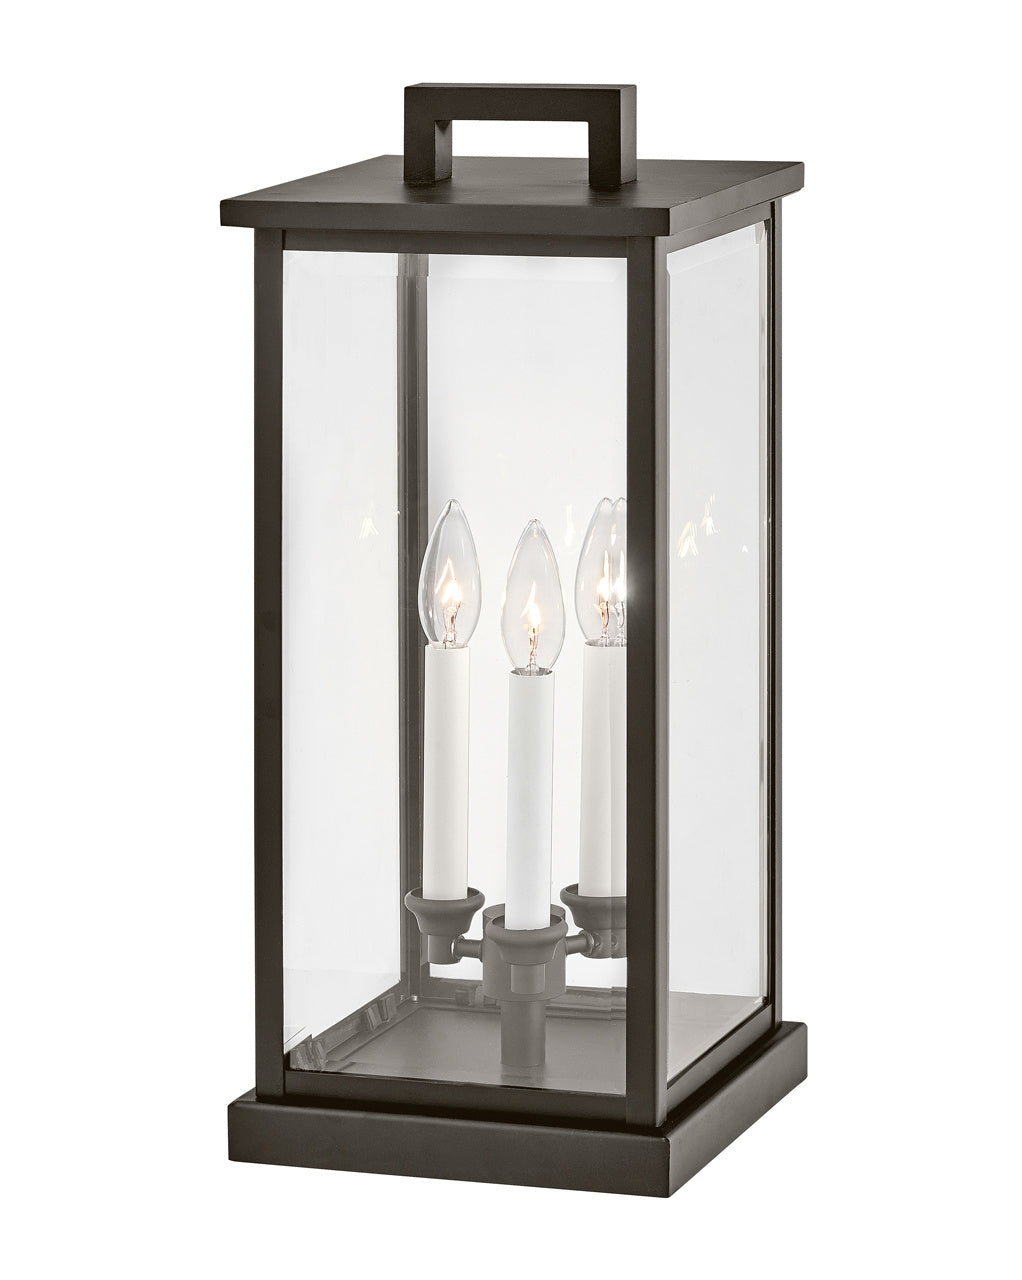 Hinkley Canada - LED Pier Mount - Weymouth - Oil Rubbed Bronze- Union Lighting Luminaires Decor